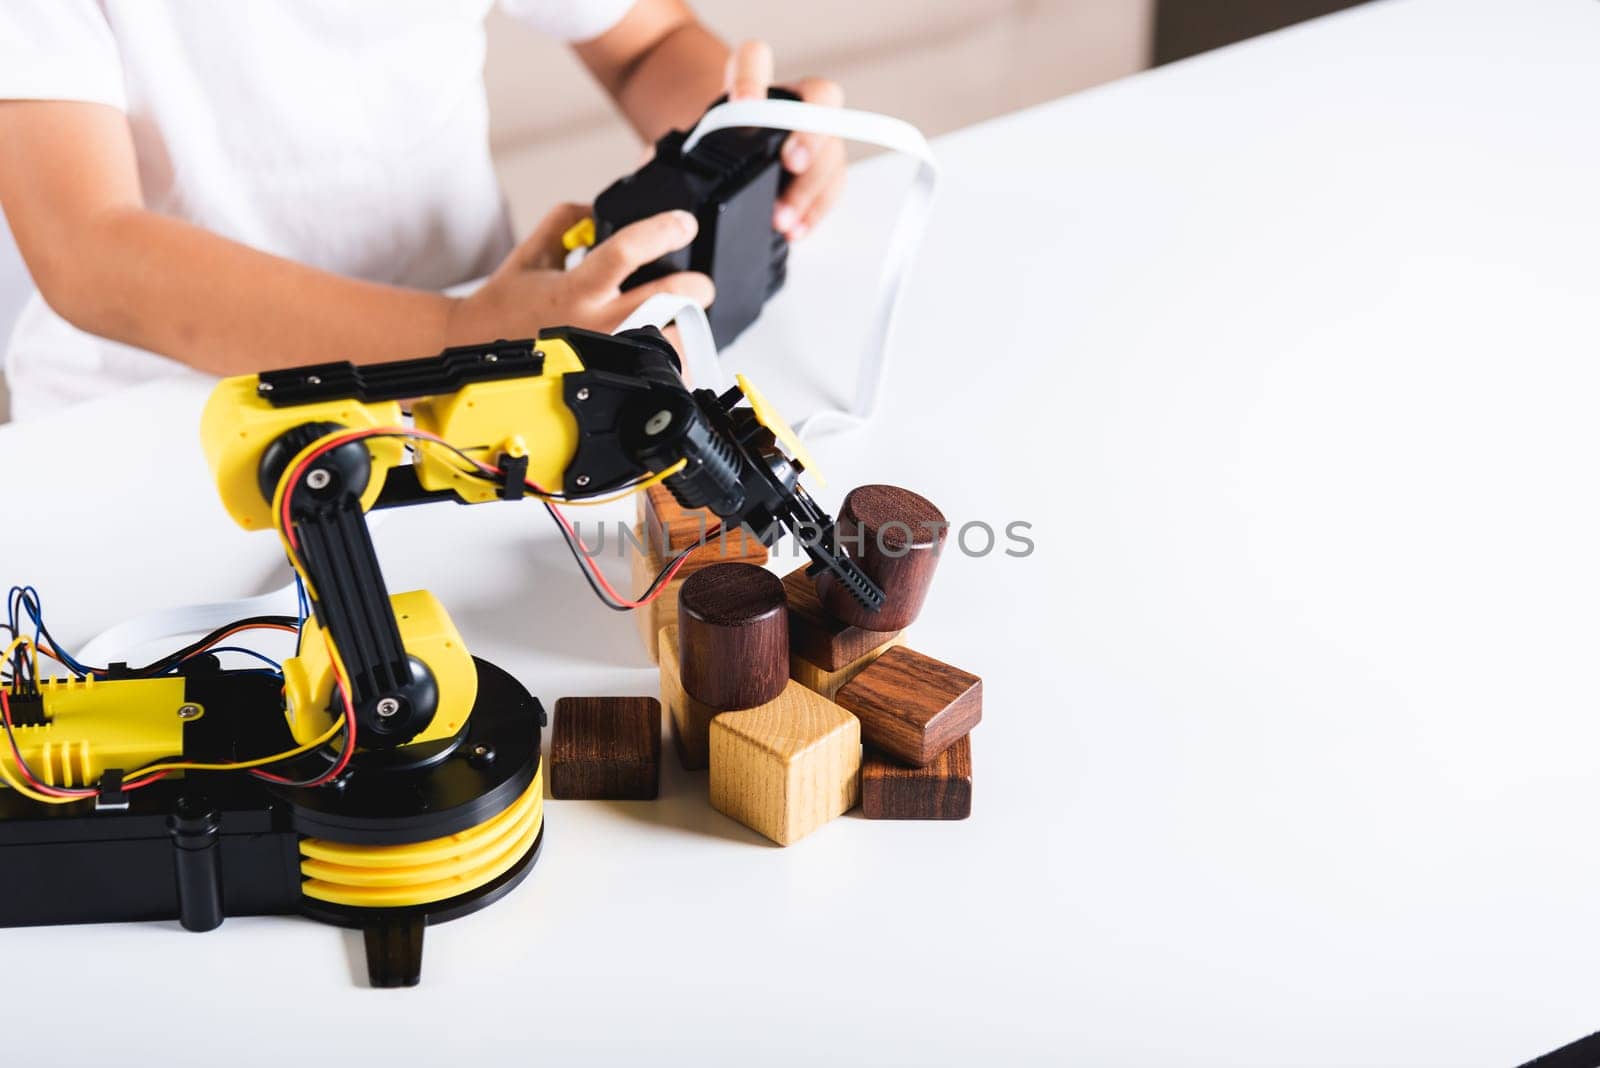 Happy Asian little kid boy using remote control playing robotic machine arm for pick up wood block by Sorapop